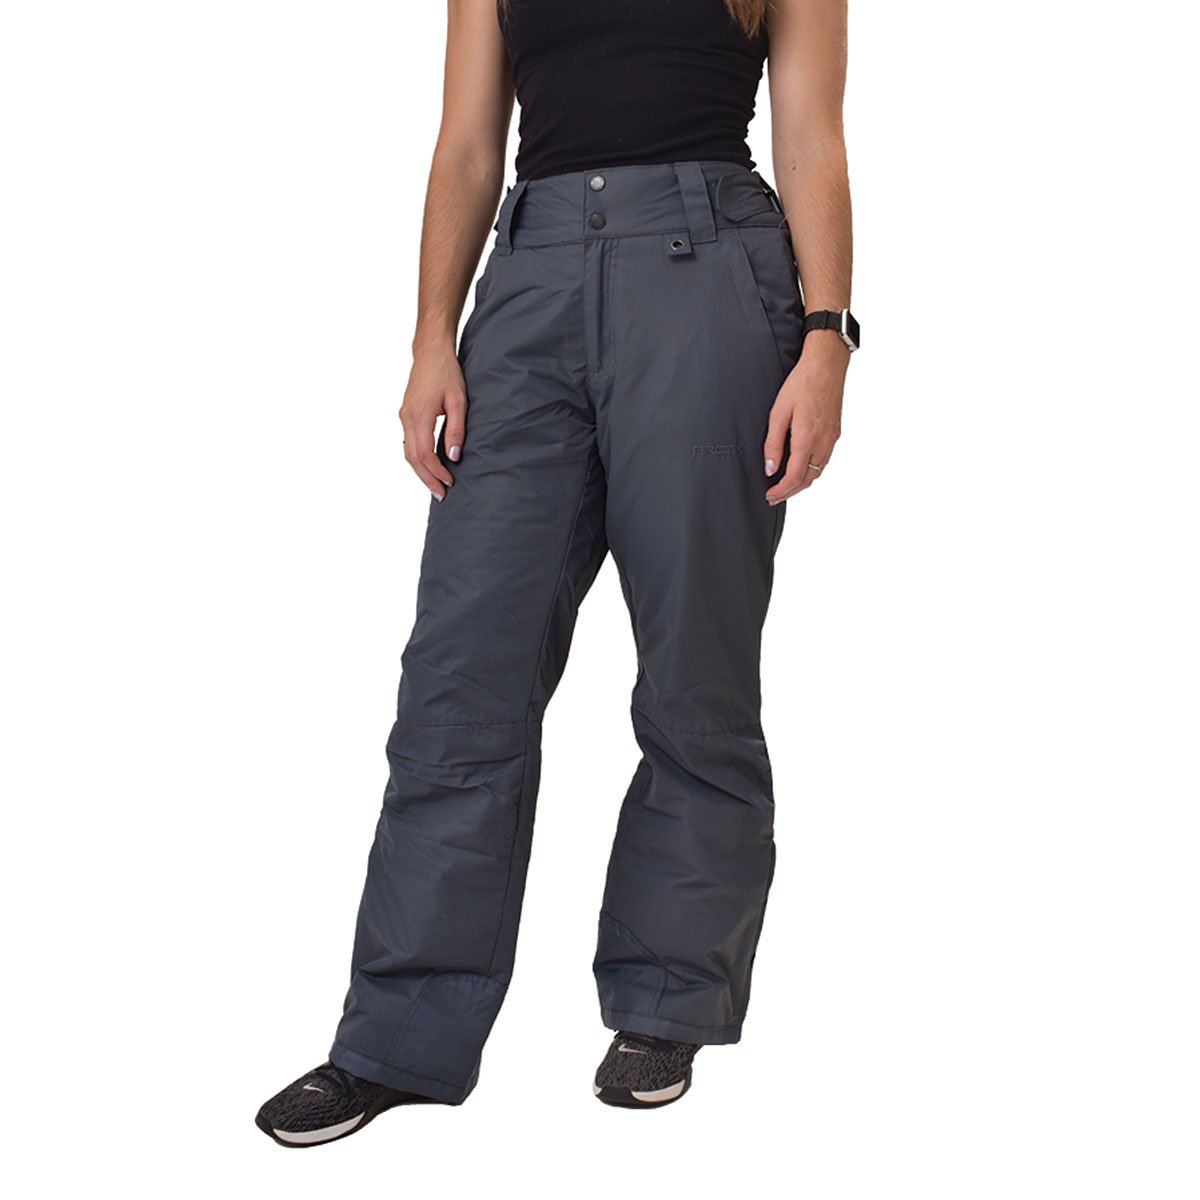 Shop Arctix bestselling ski snow and utility pants for outdoor life